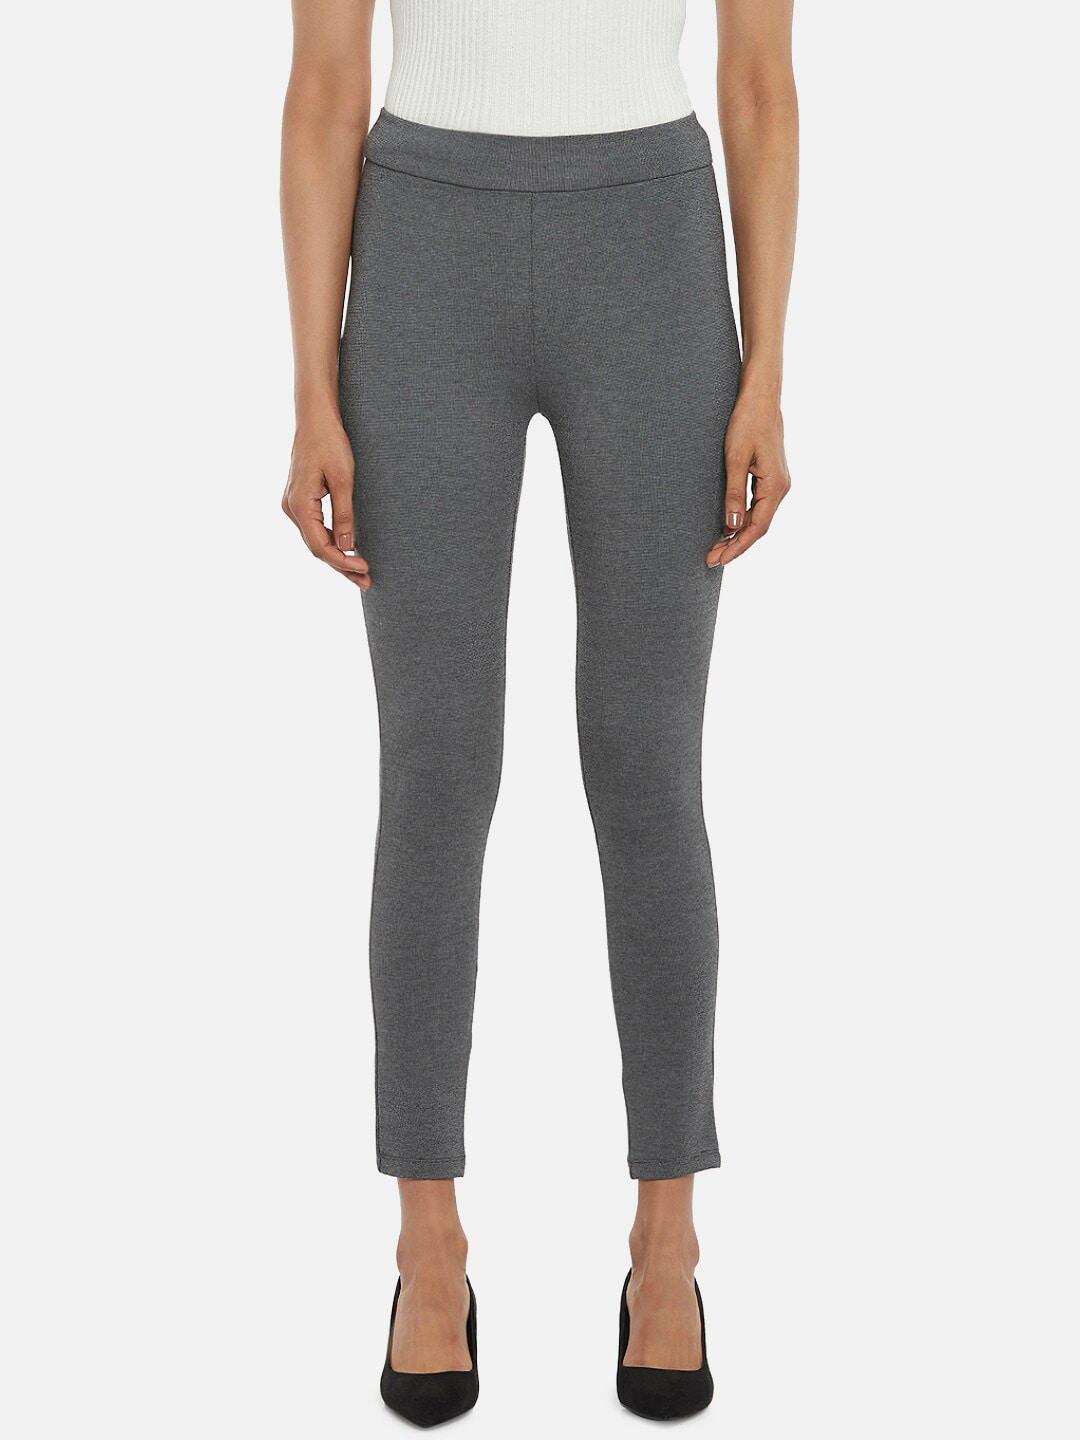 annabelle-by-pantaloons-women-grey-solid-ankle-length-skinny-fit-treggings